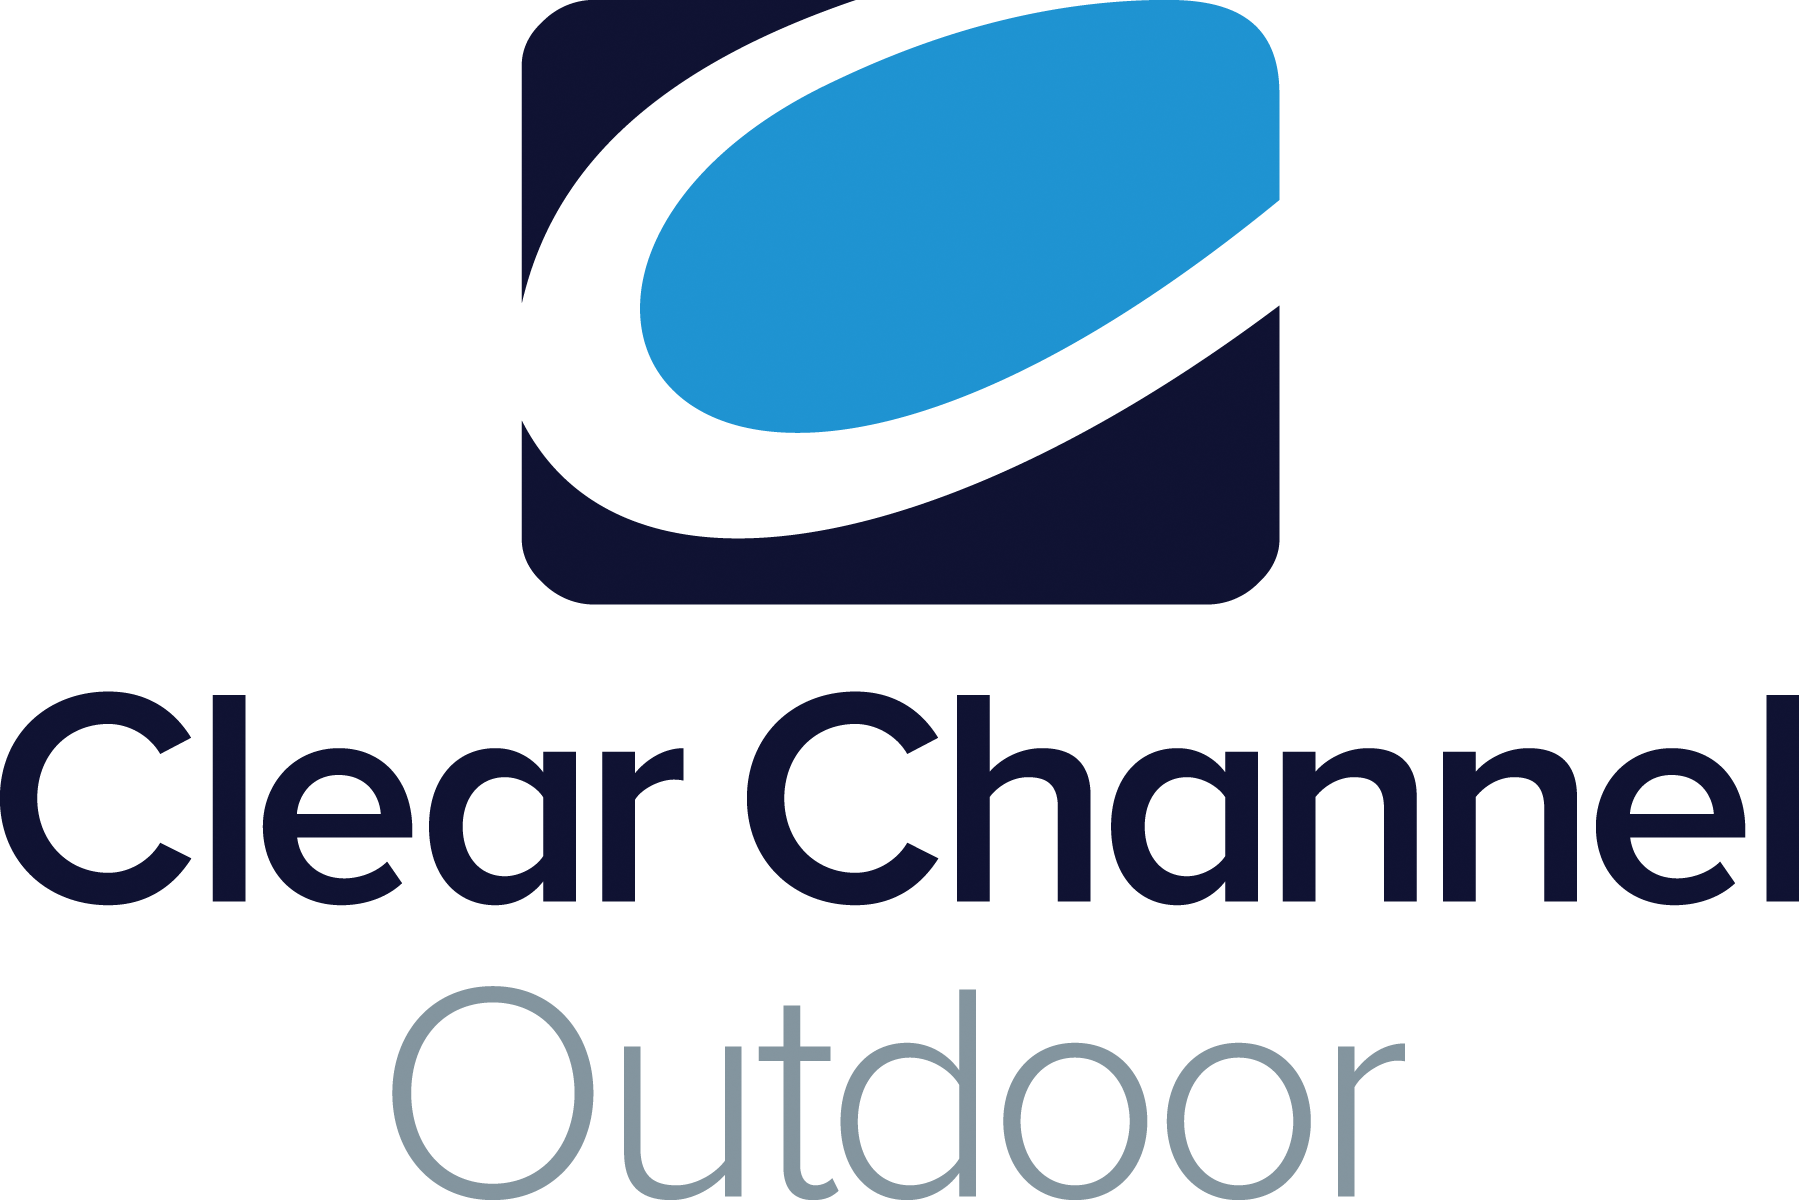 Clear Channel Outdoor logo